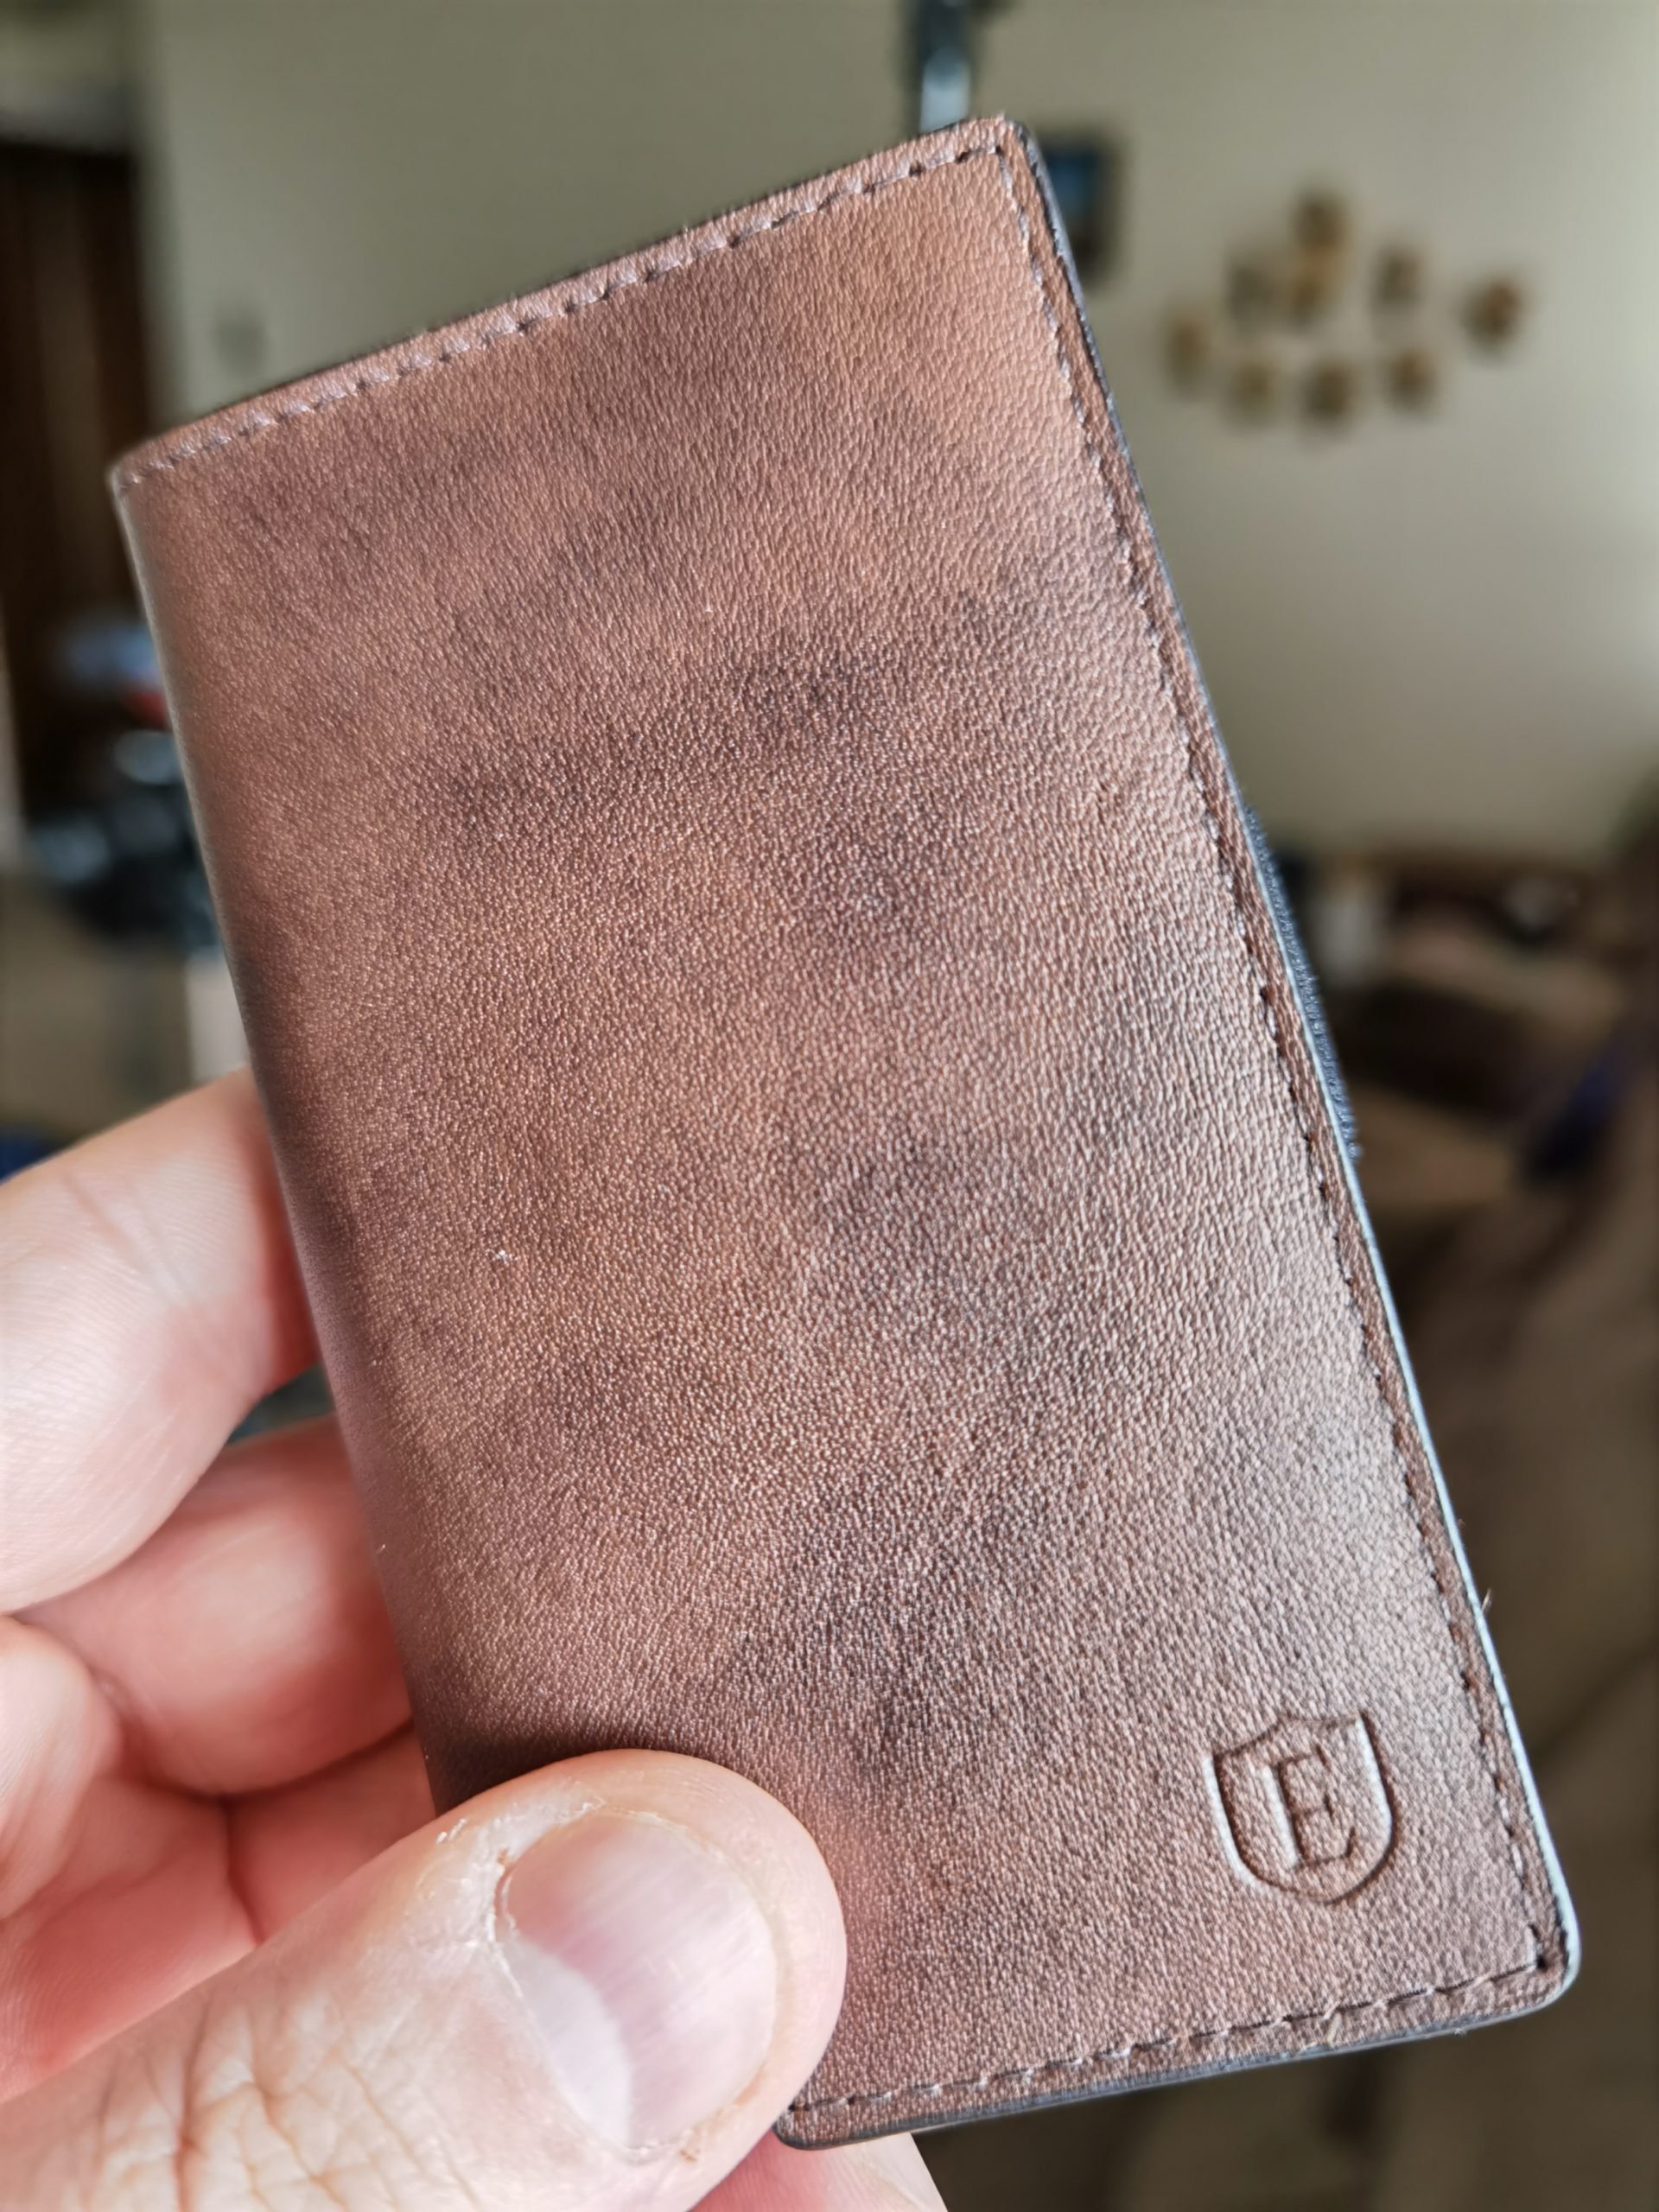 Ekster Parliament - A Smart Wallet With Style